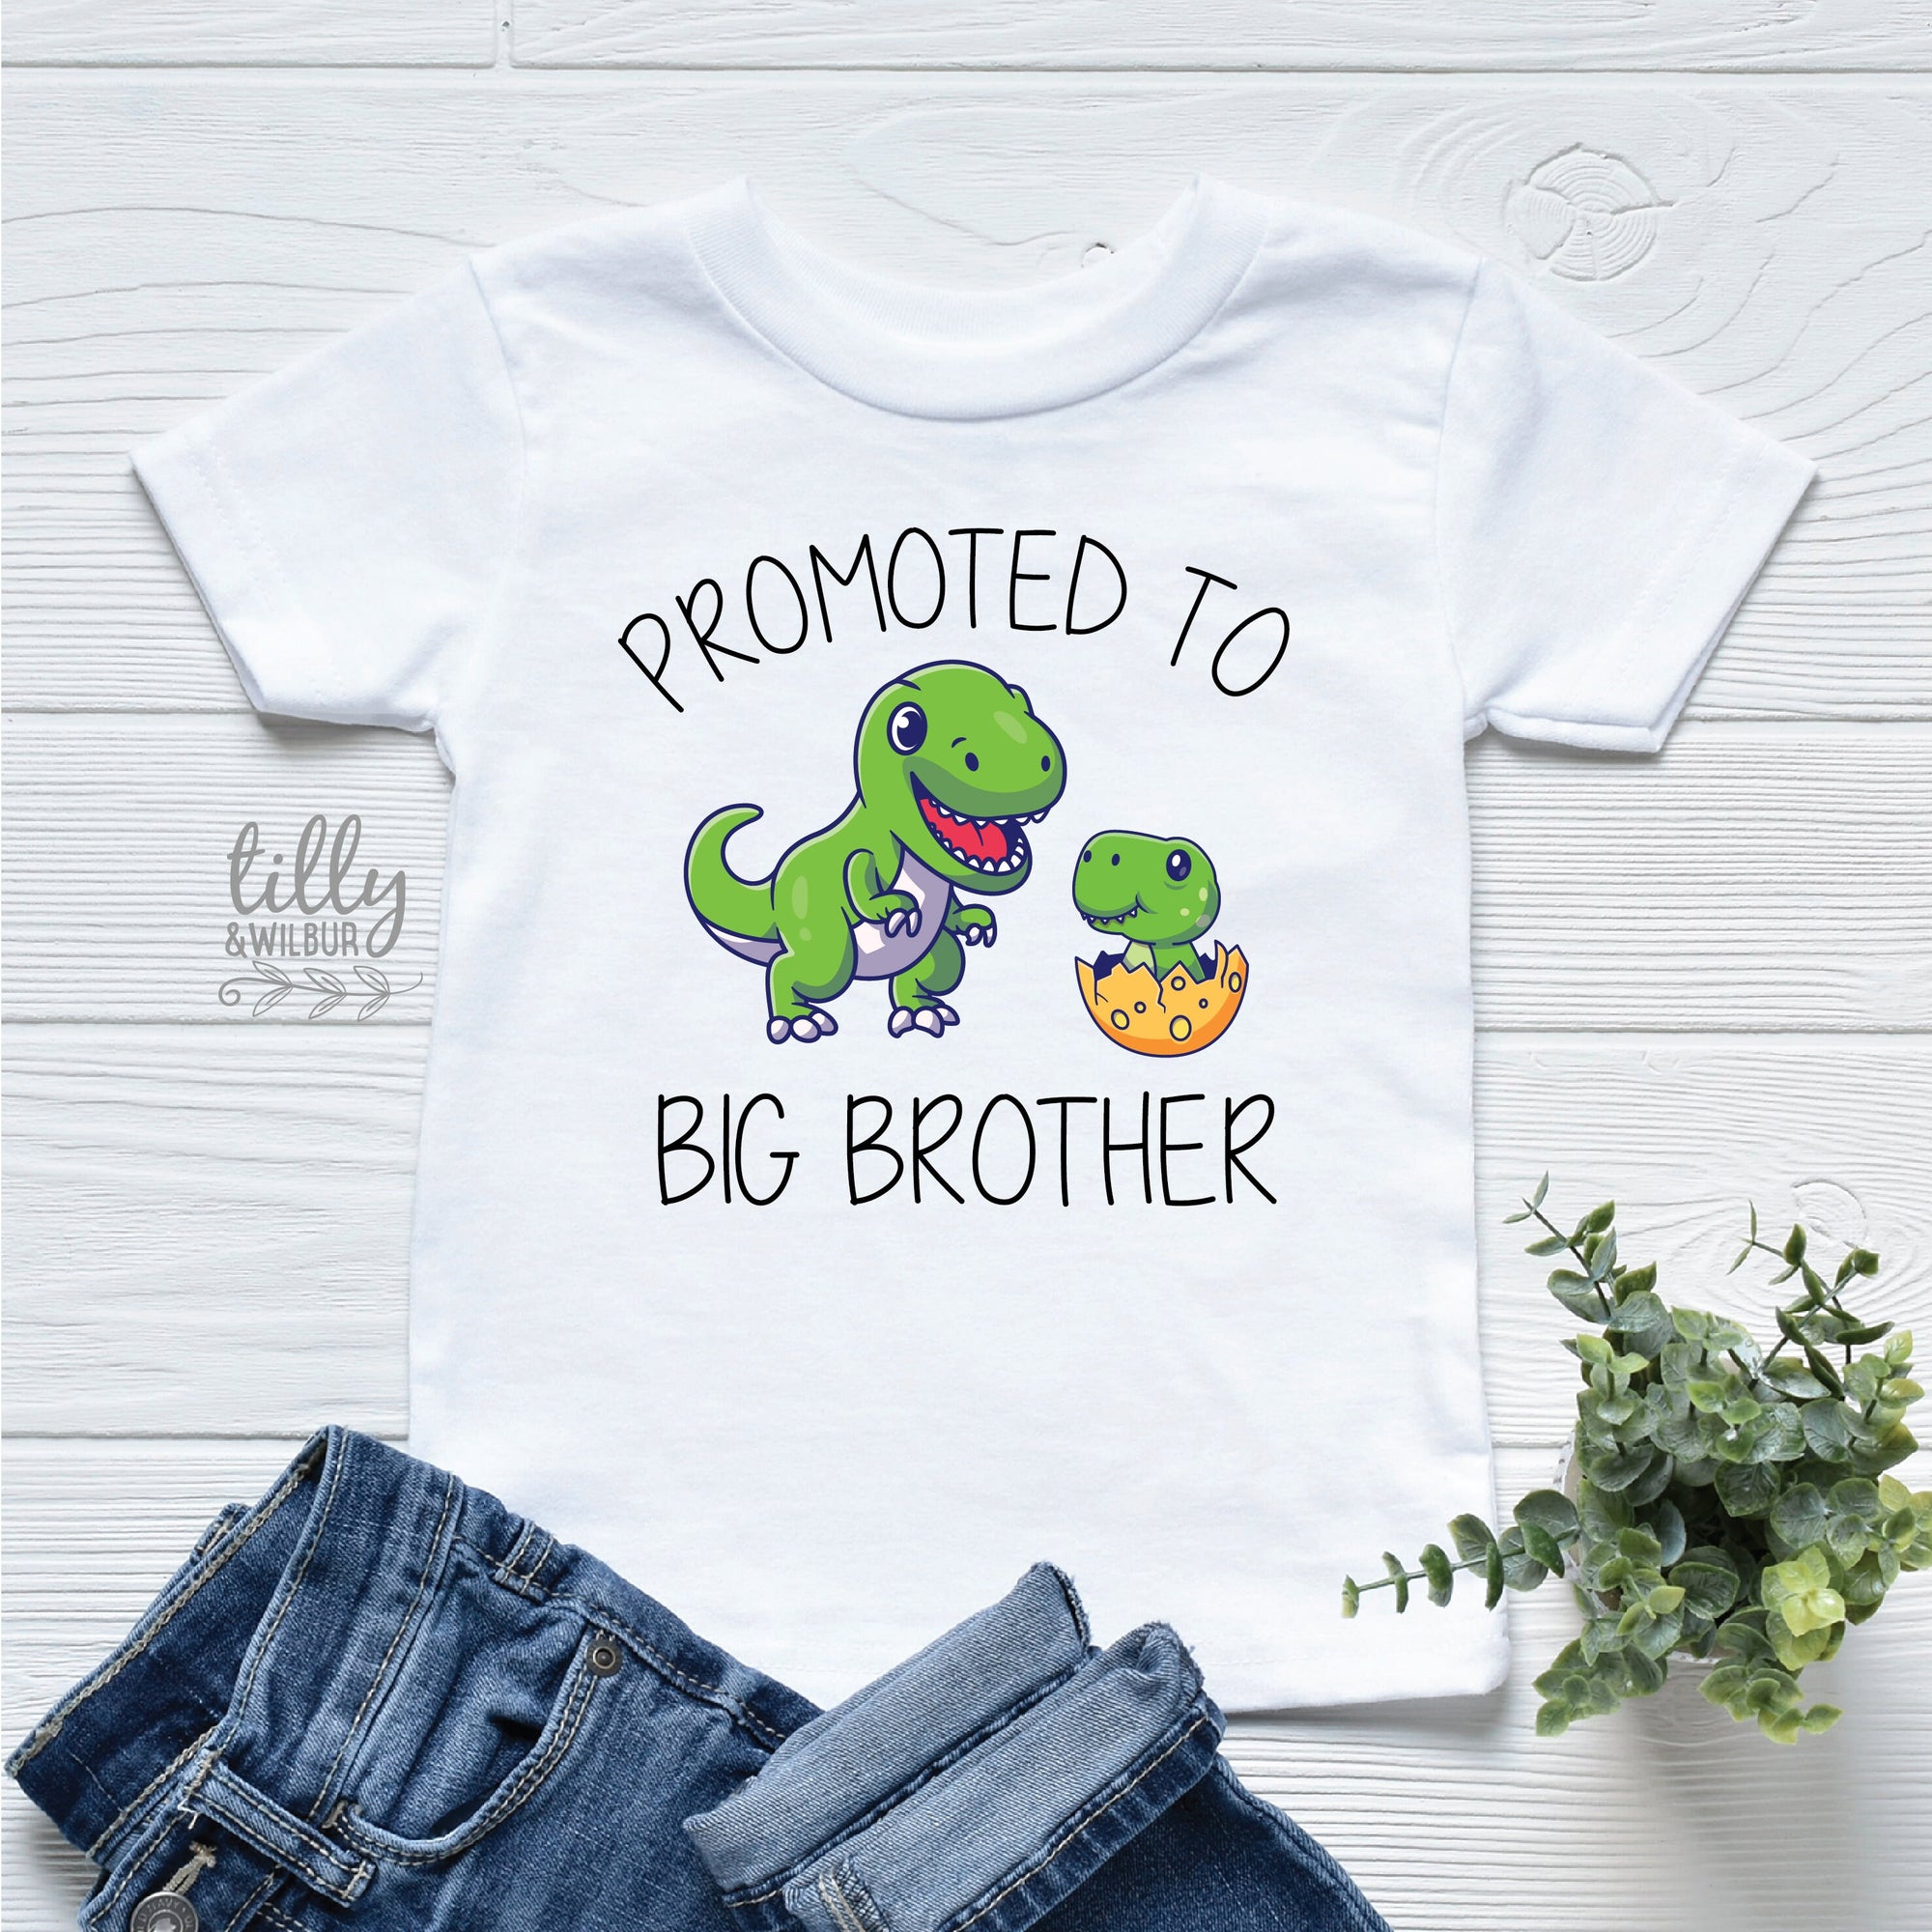 Big Brother T-Shirt, Promoted To Big Brother T-Shirt, Big Brother Shirt, I'm Going To Be A Big Brother, Pregnancy Announcement, Dinosaur Tee